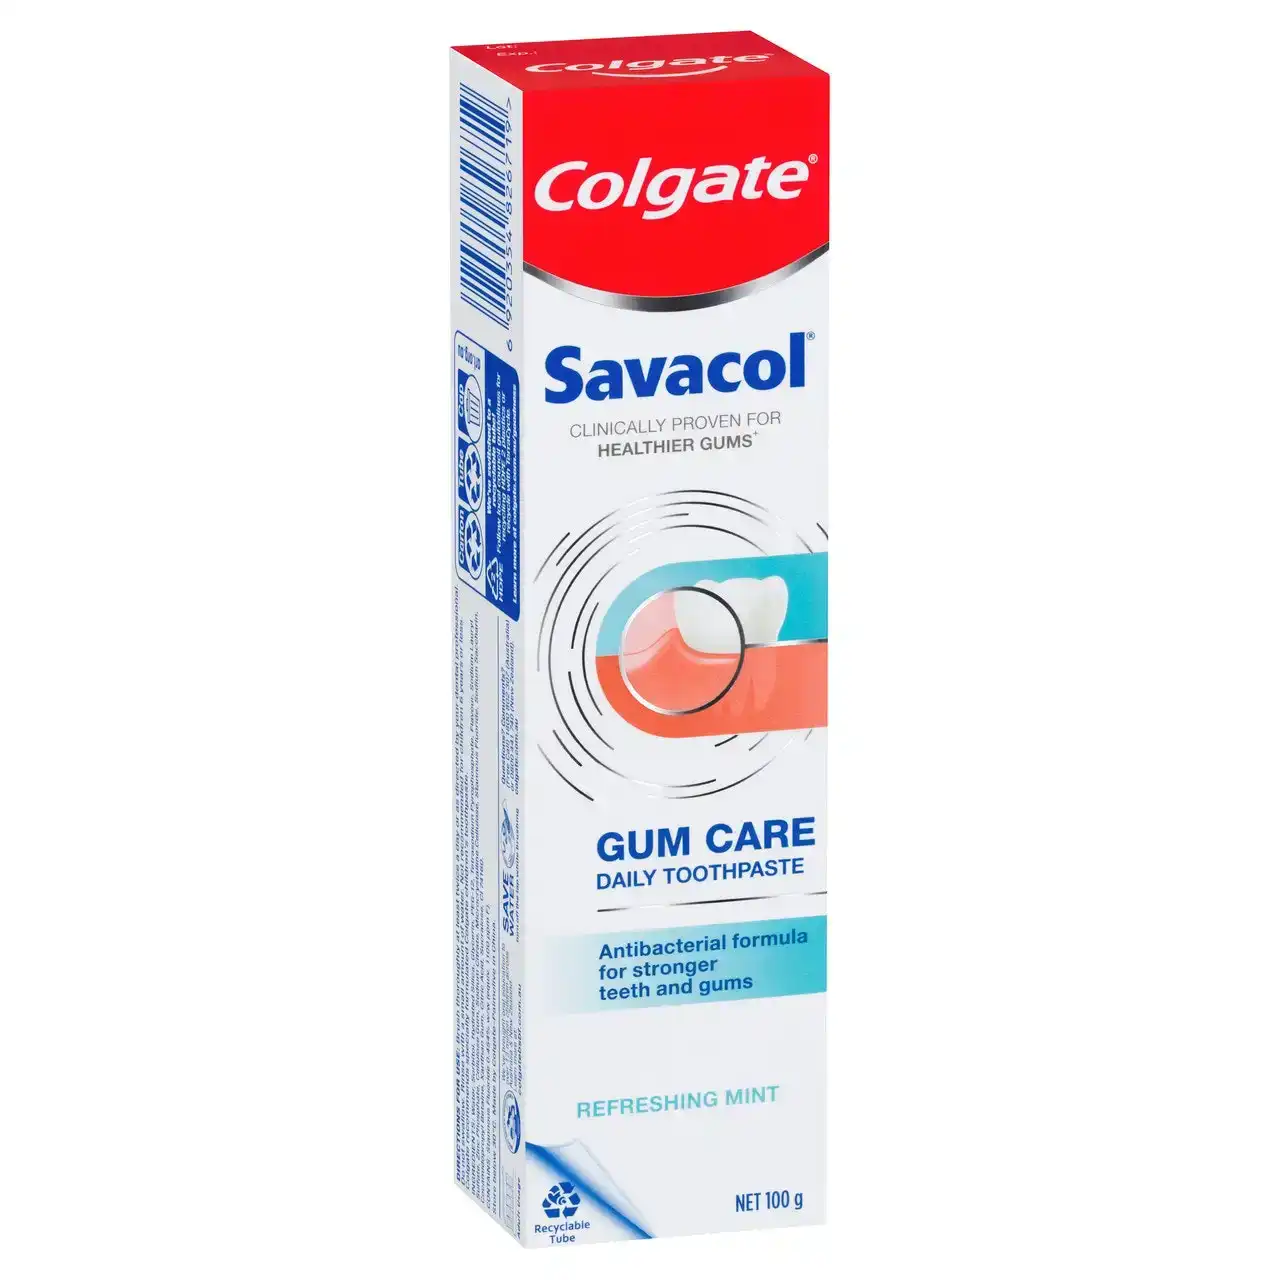 Colgate Savacol Gum Care Daily Toothpaste Refreshing Mint 100g